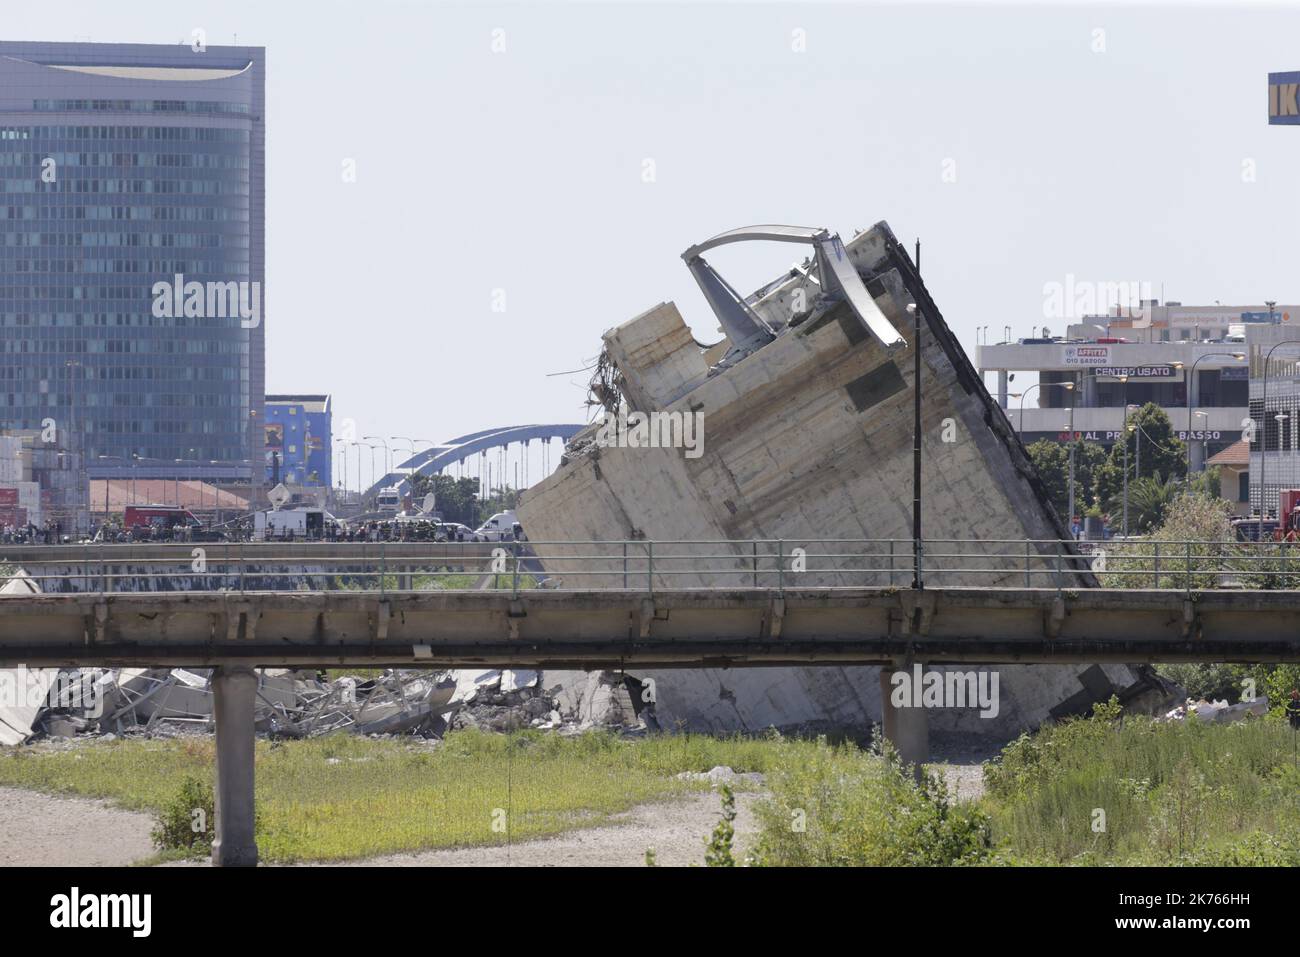 A collapsed bridge over the A10 highway in Genoa, Italy, 14 August 2018. At least 30 people are believed to have died as a large section of the Morandi viaduct upon which the A10 motorway runs collapsed in Genoa on Tuesday. Stock Photo